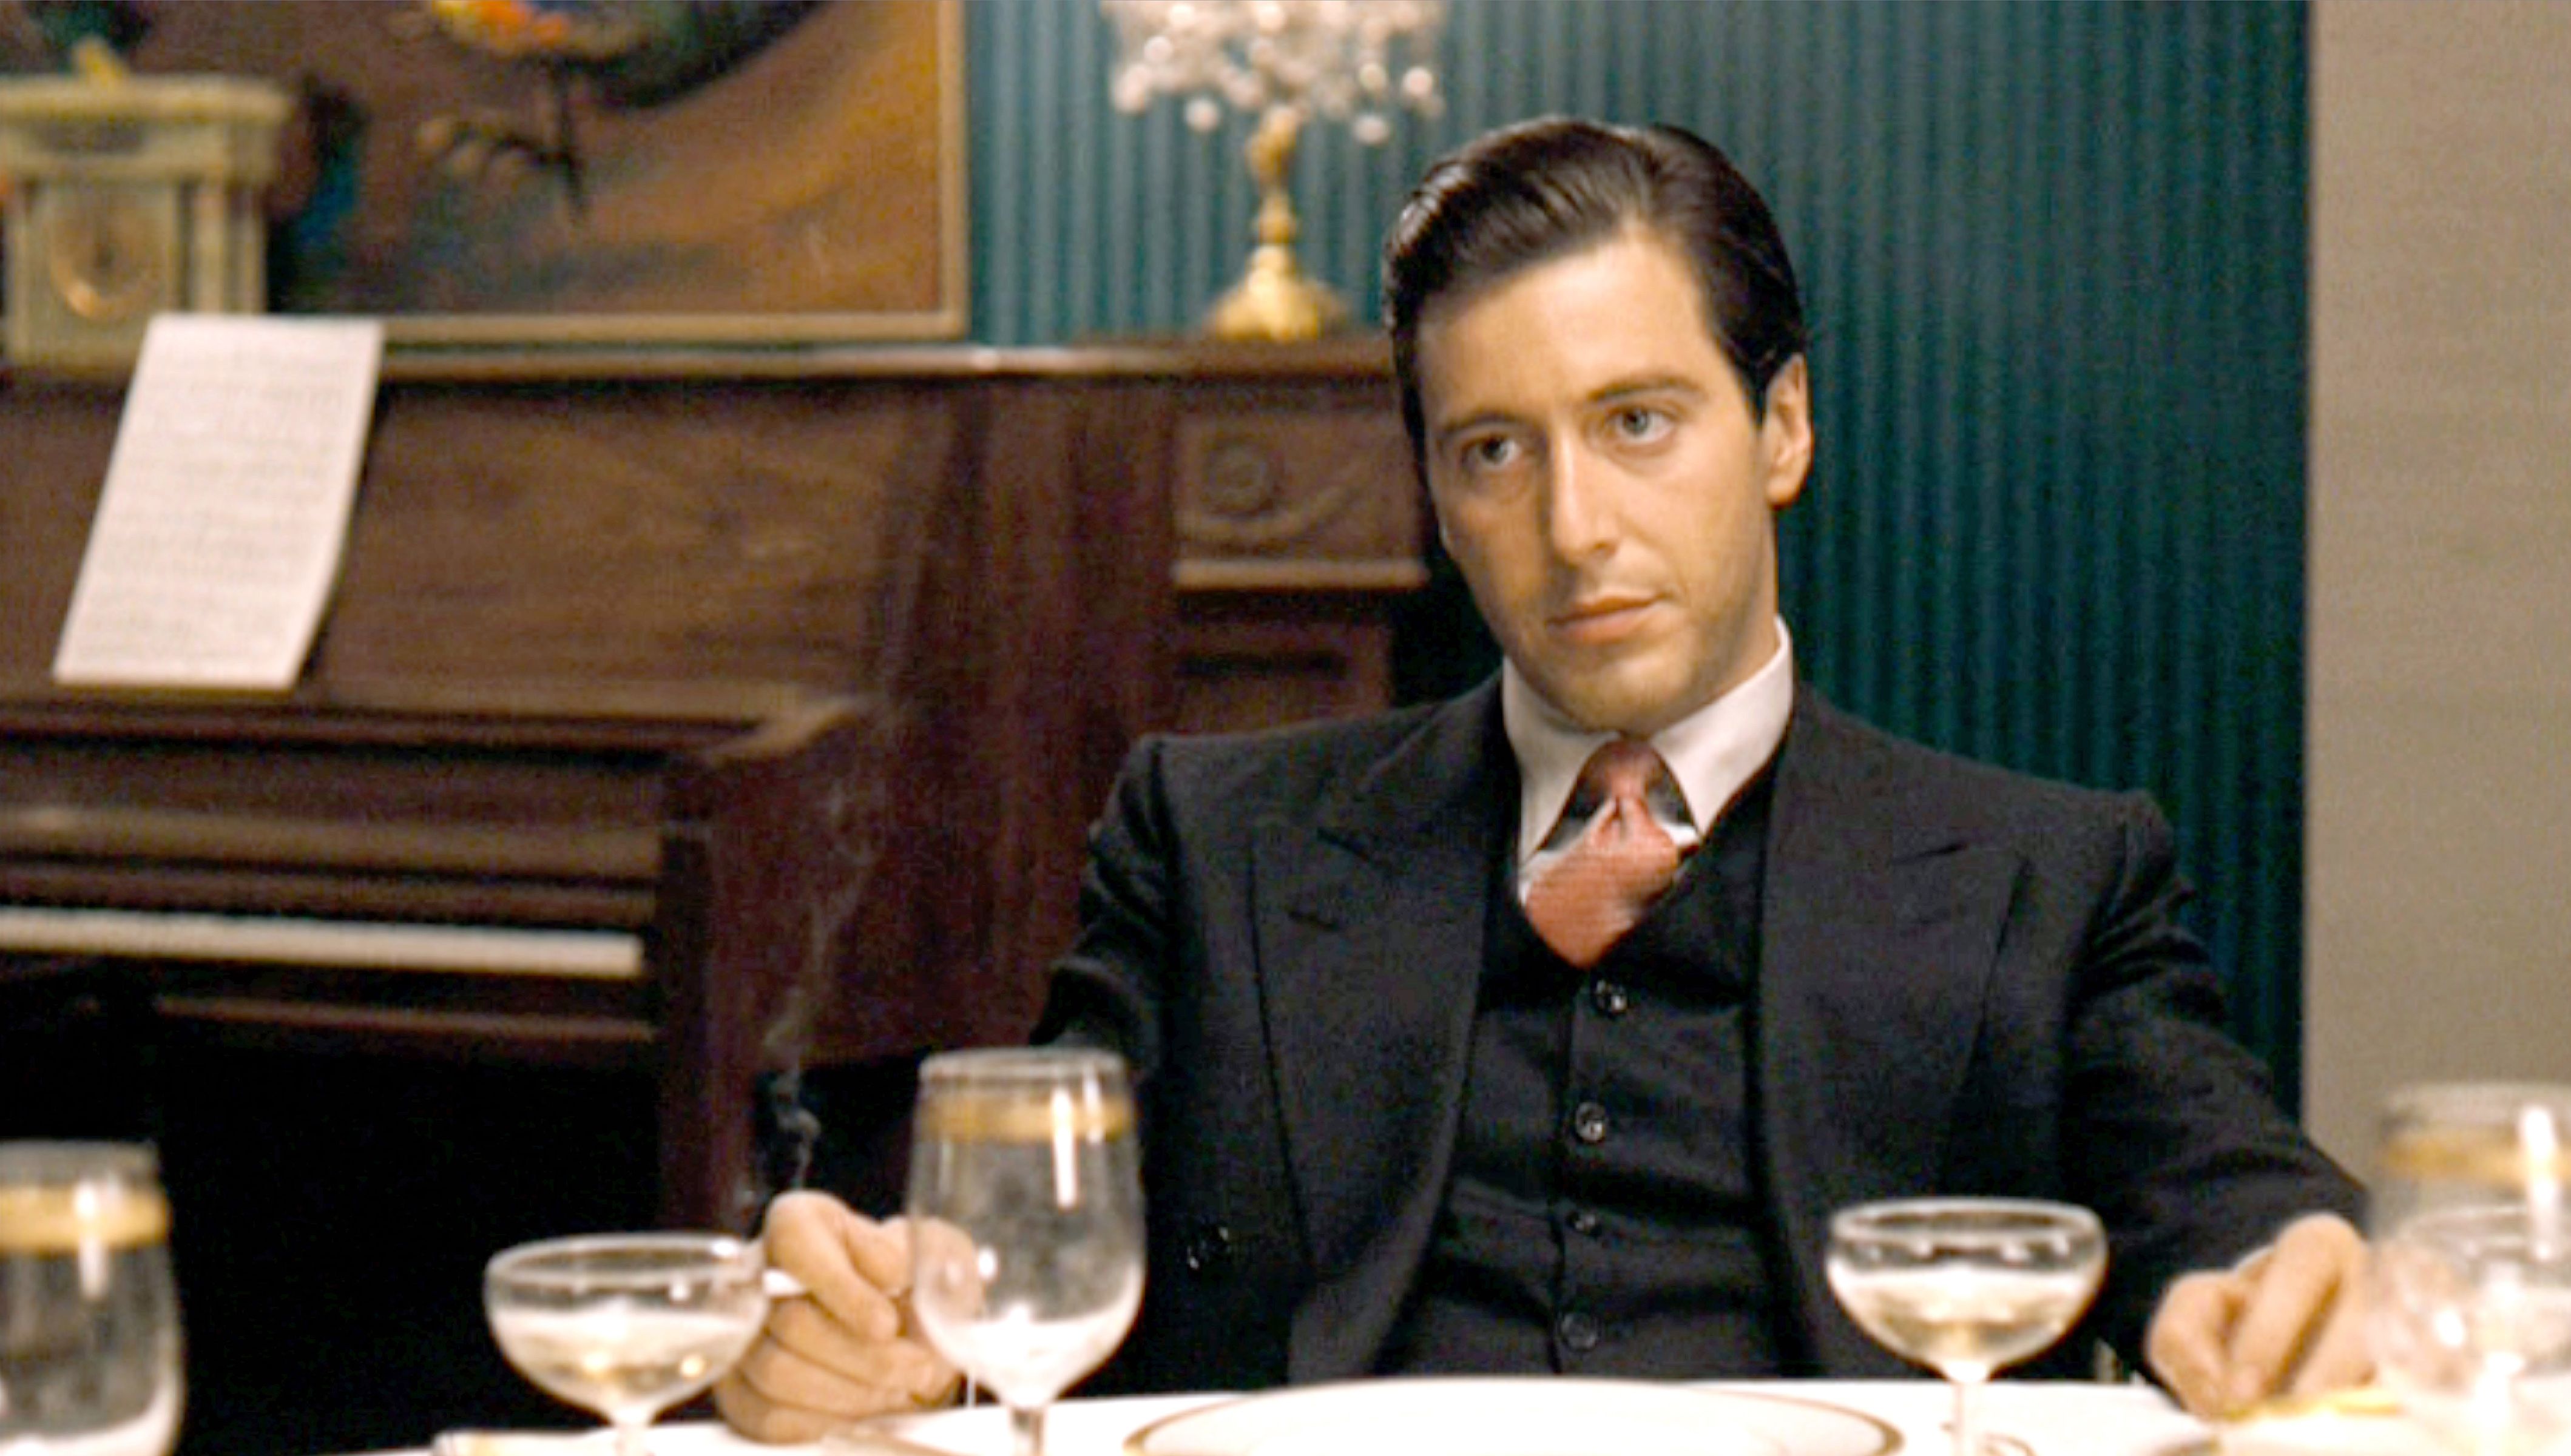 PWE Tension #4 : Breakdown  Al-pacino-as-michael-corleone-in-the-godfather-the-movie-news-photo-1646925222